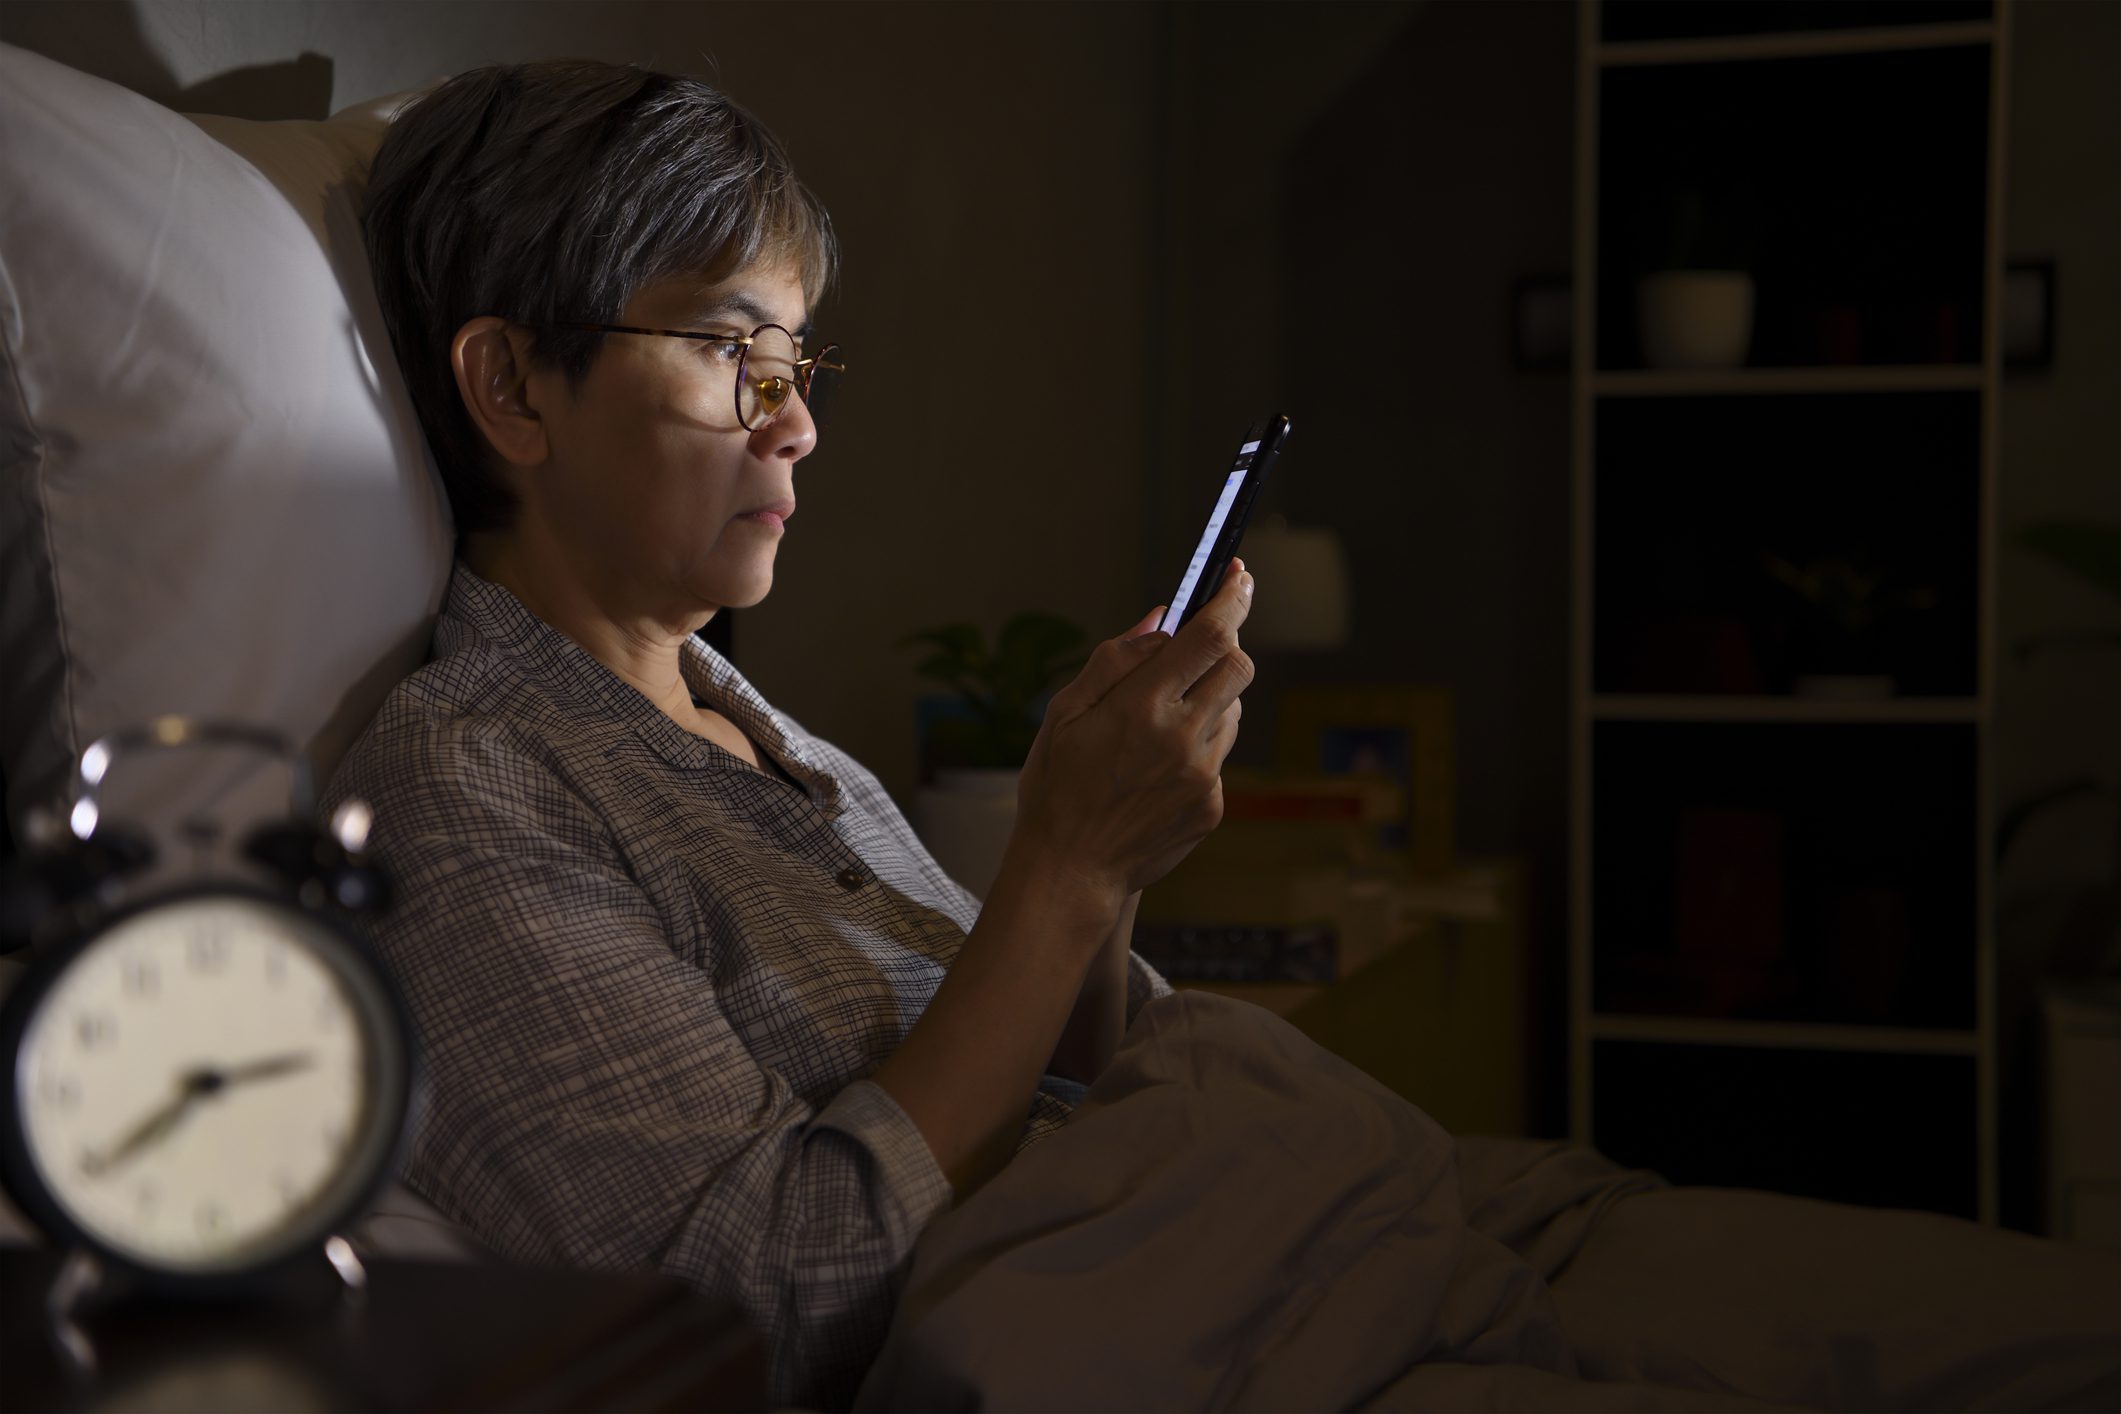 Asian senior woman having sore and tired eyes when using a smartphone while lying in bed at night